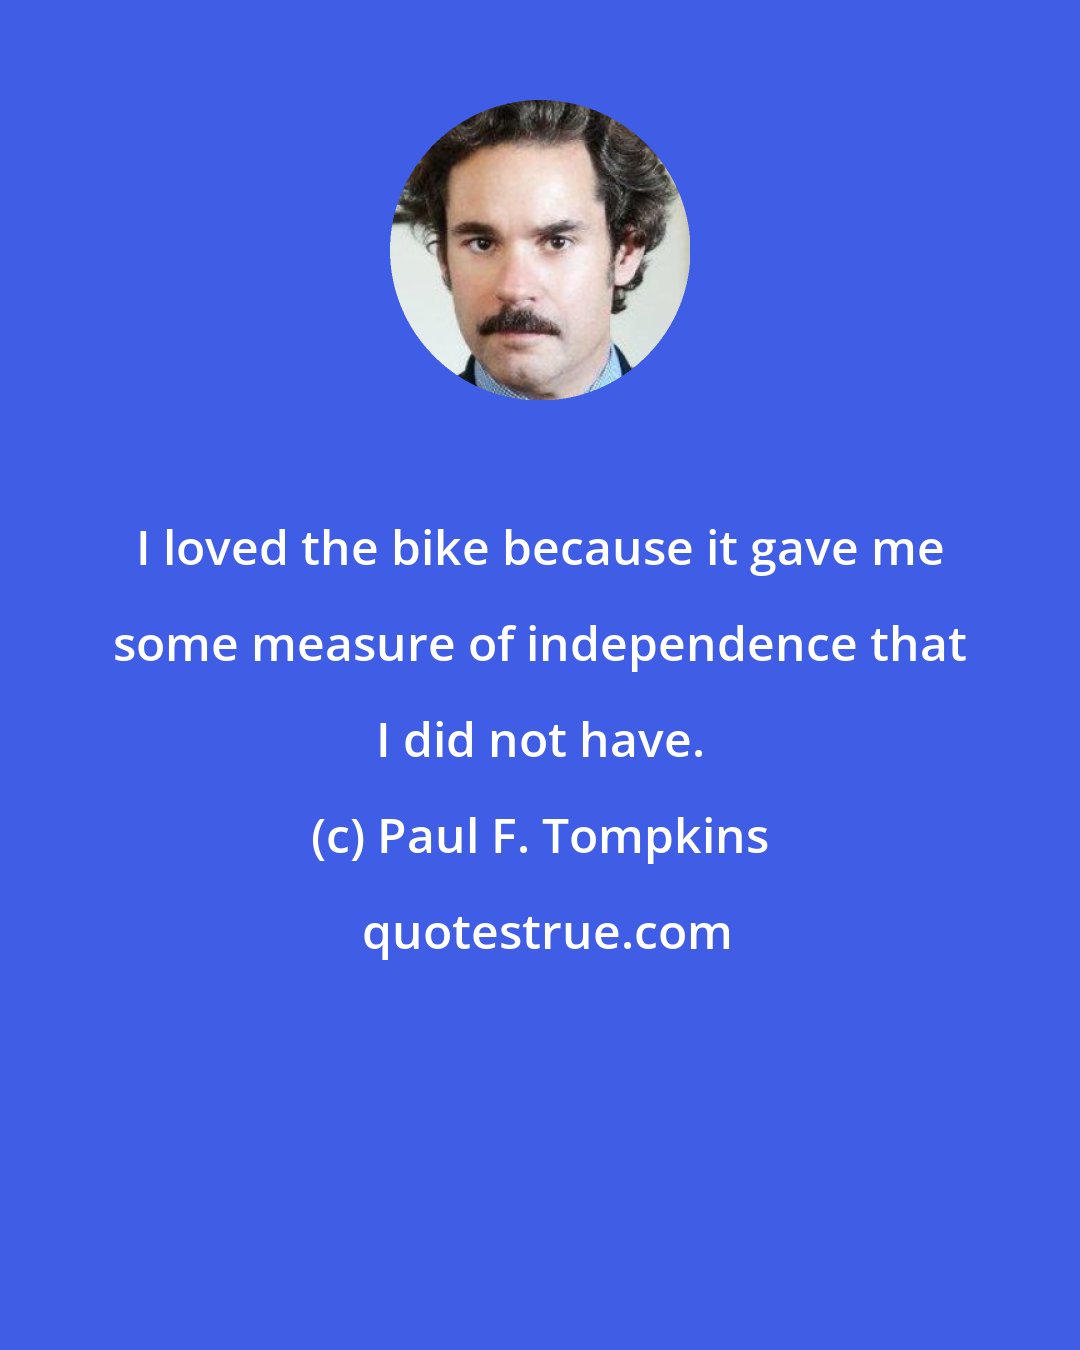 Paul F. Tompkins: I loved the bike because it gave me some measure of independence that I did not have.